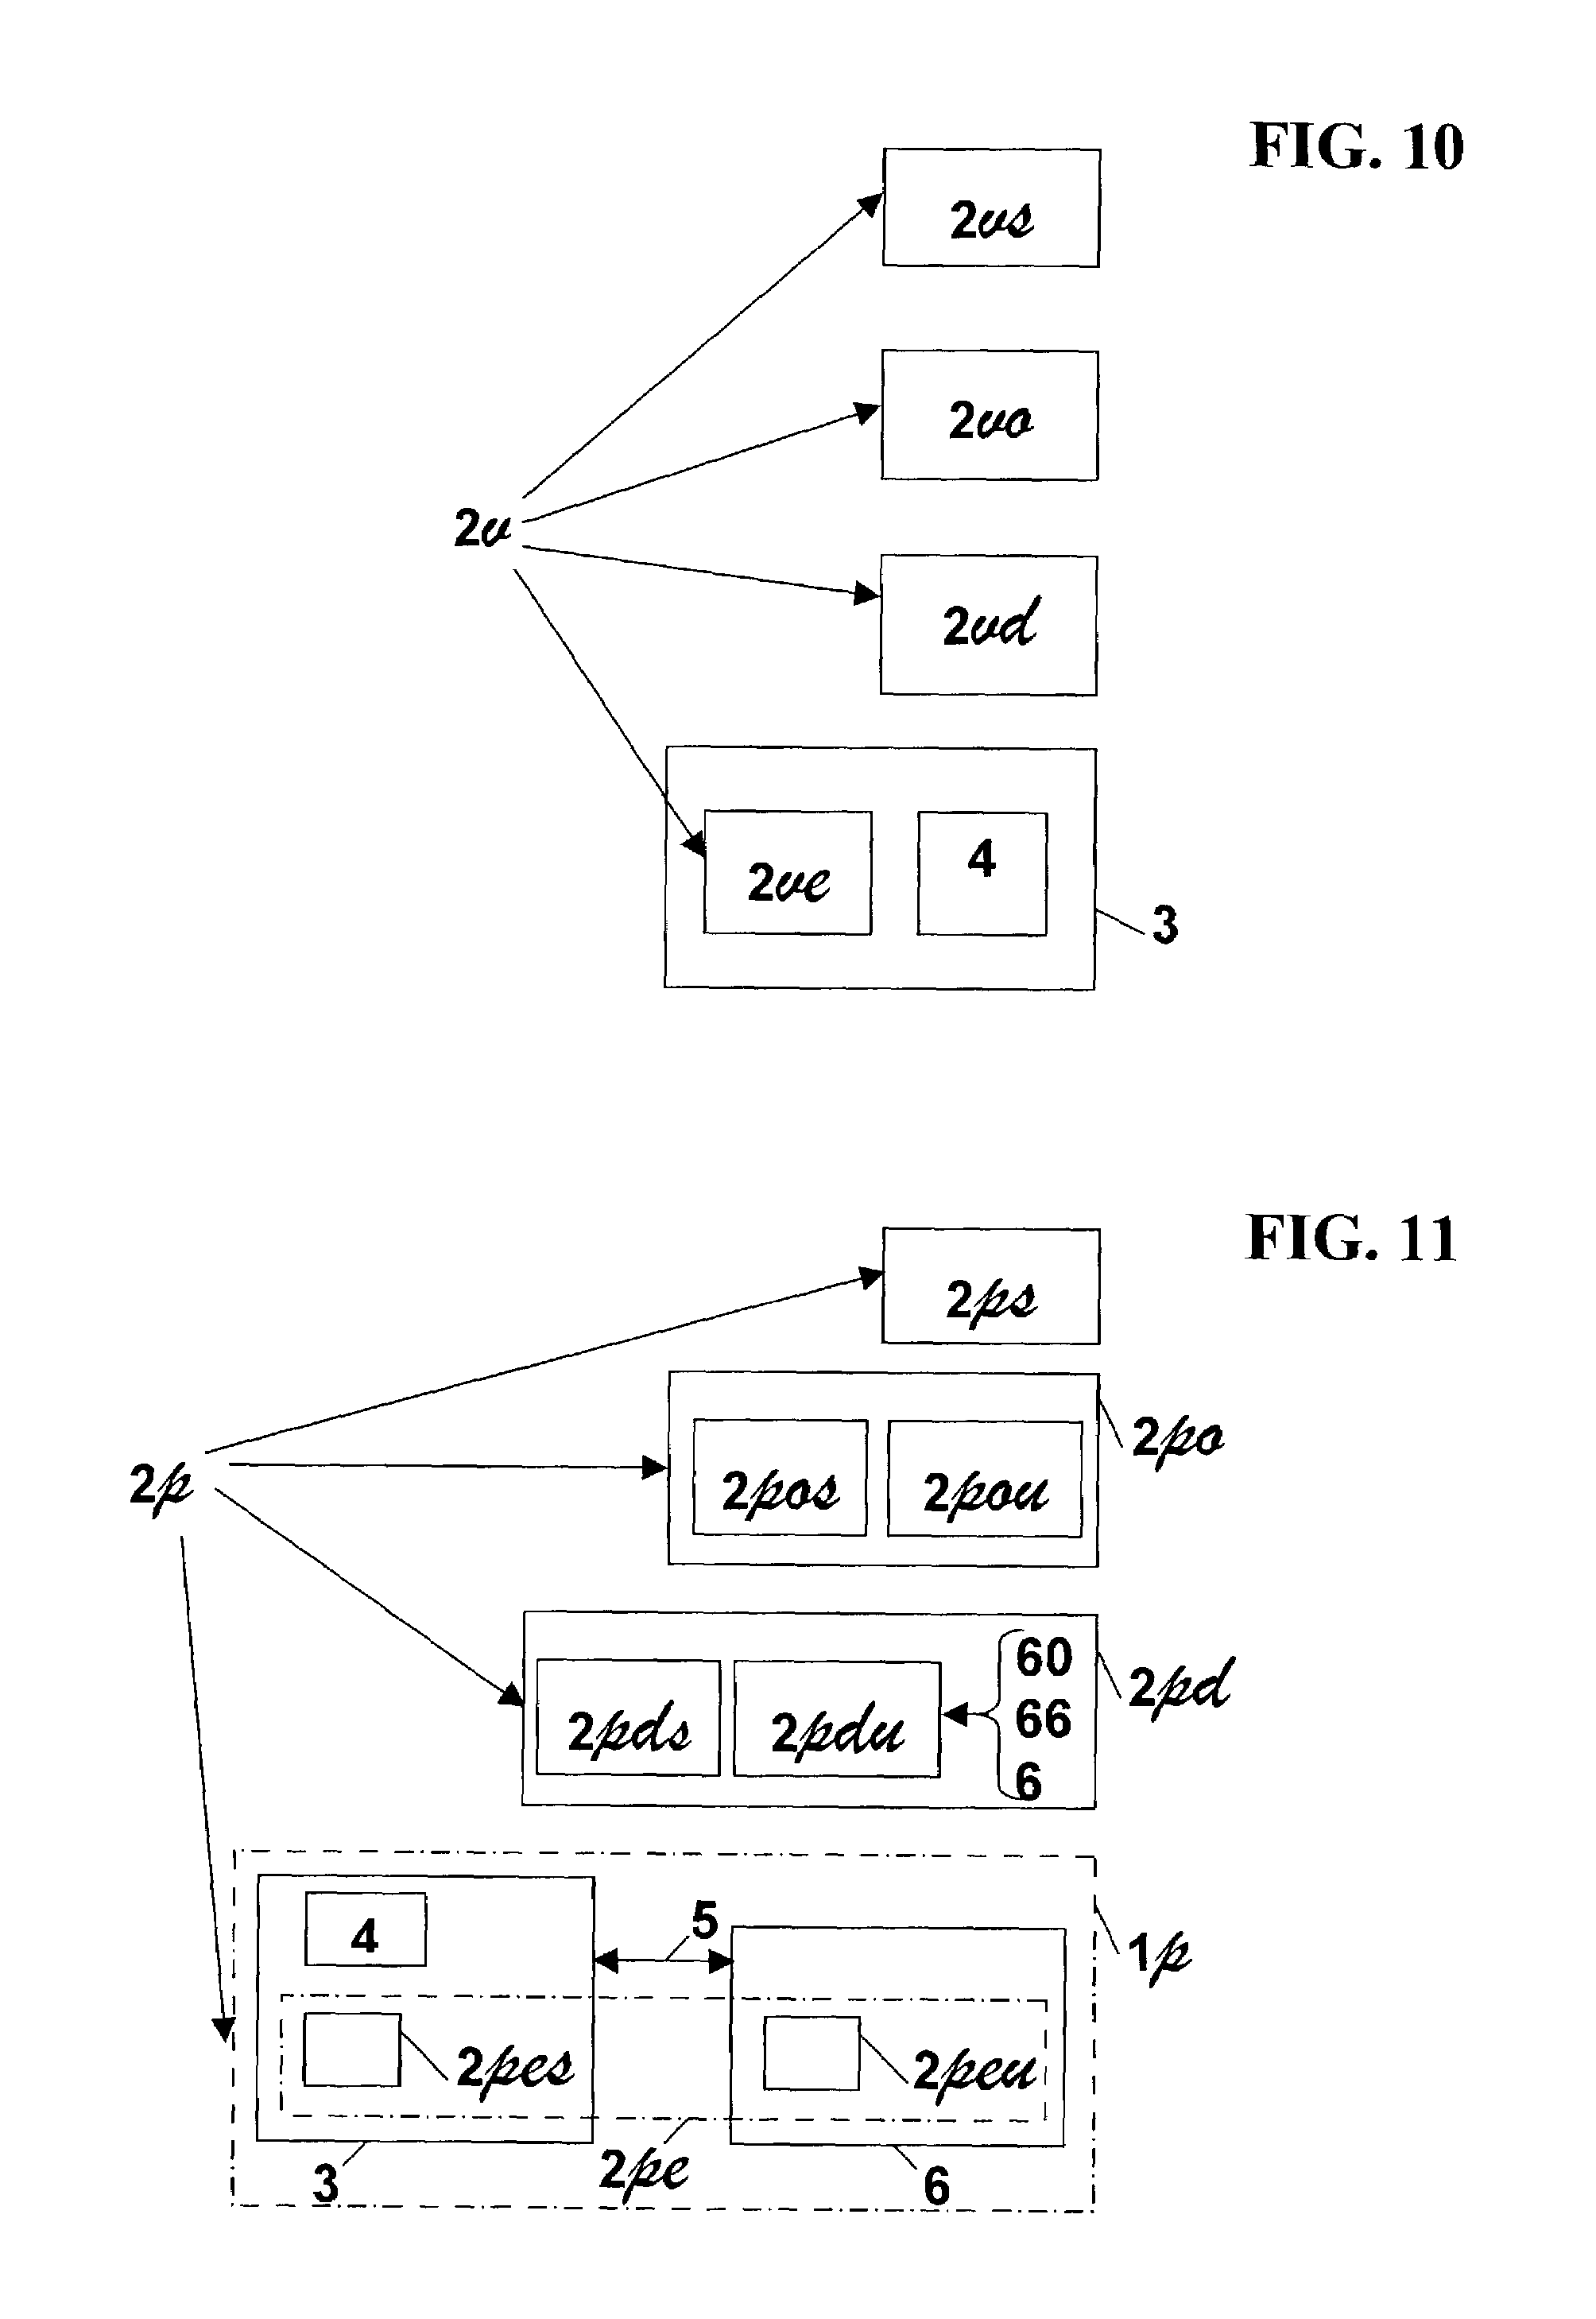 Method to protect software against unwanted use with a "temporal dissociation" principle